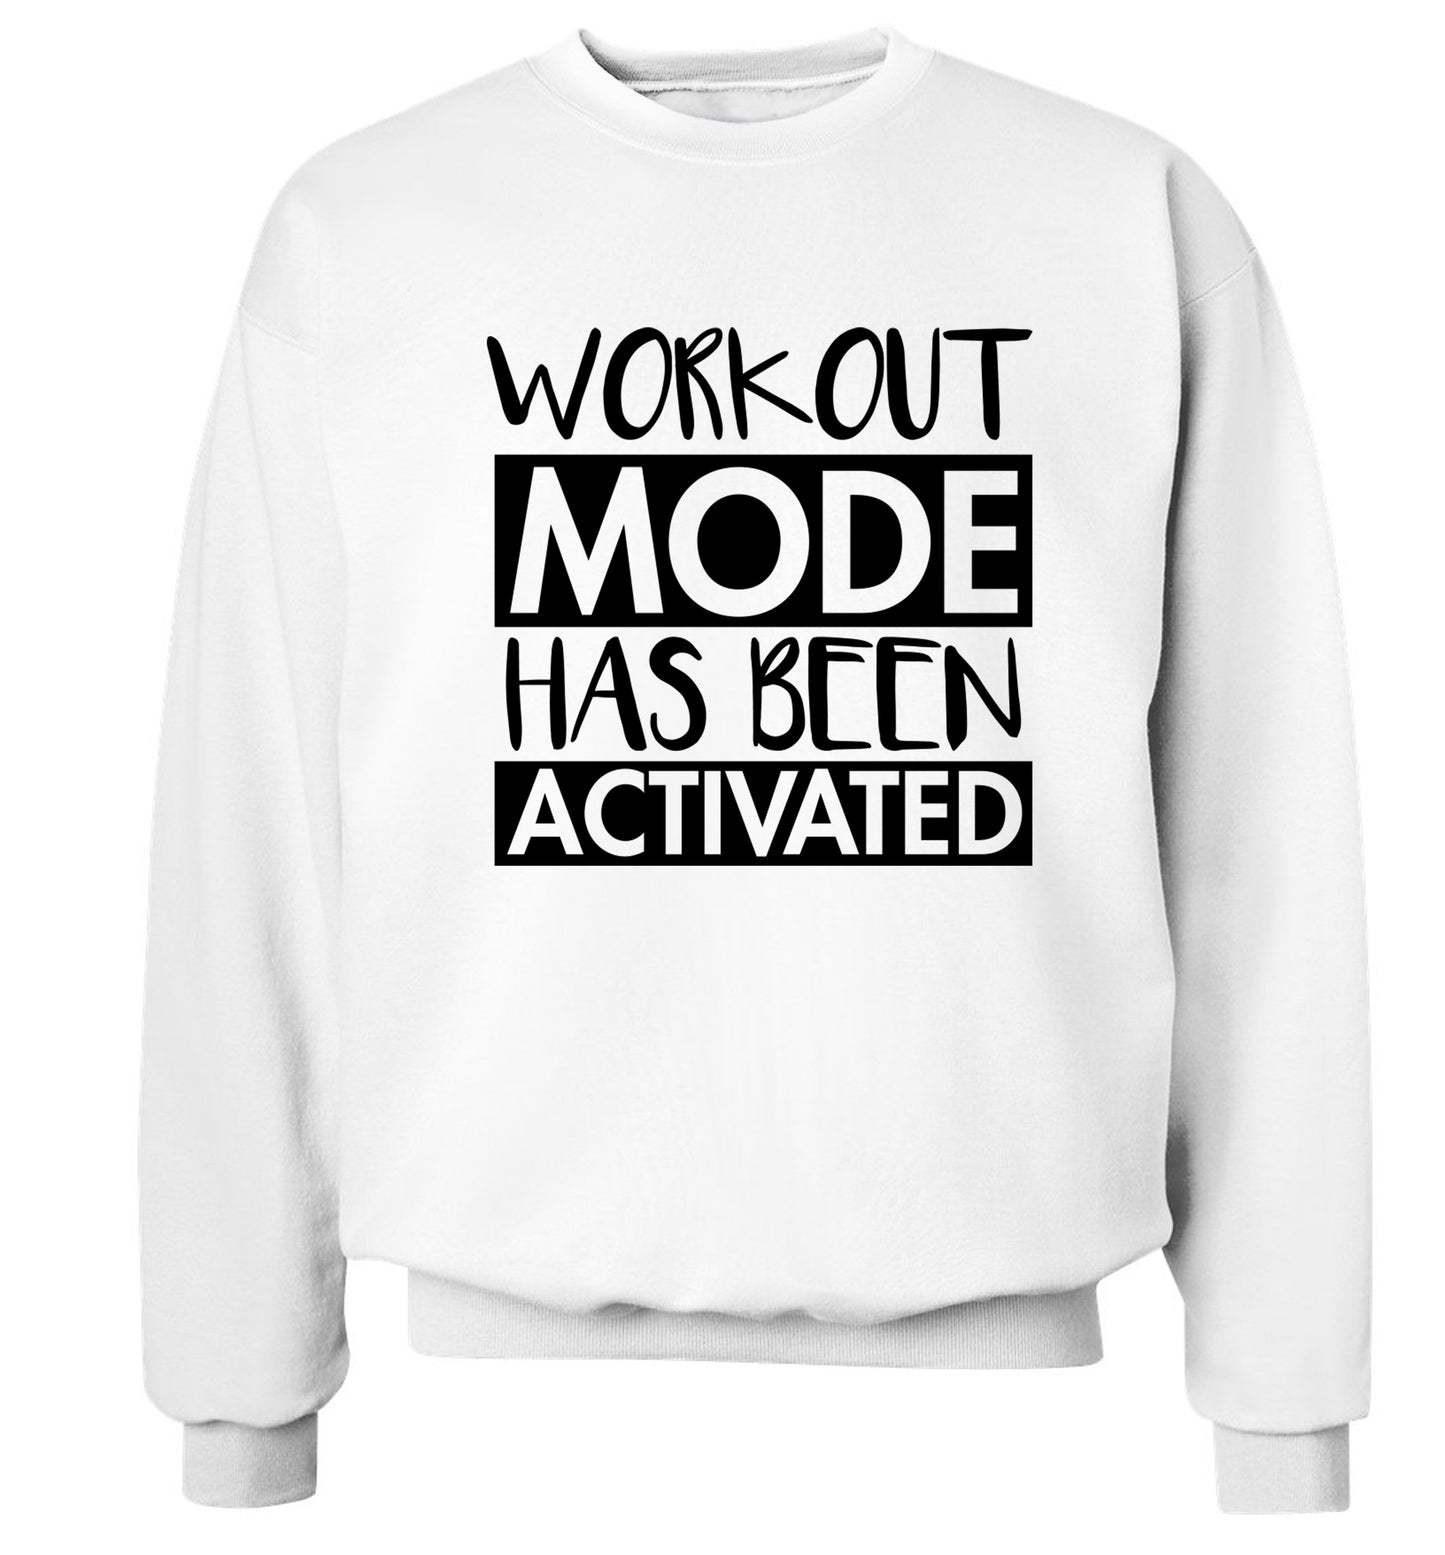 Workout mode has been activated Adult's unisex white Sweater 2XL